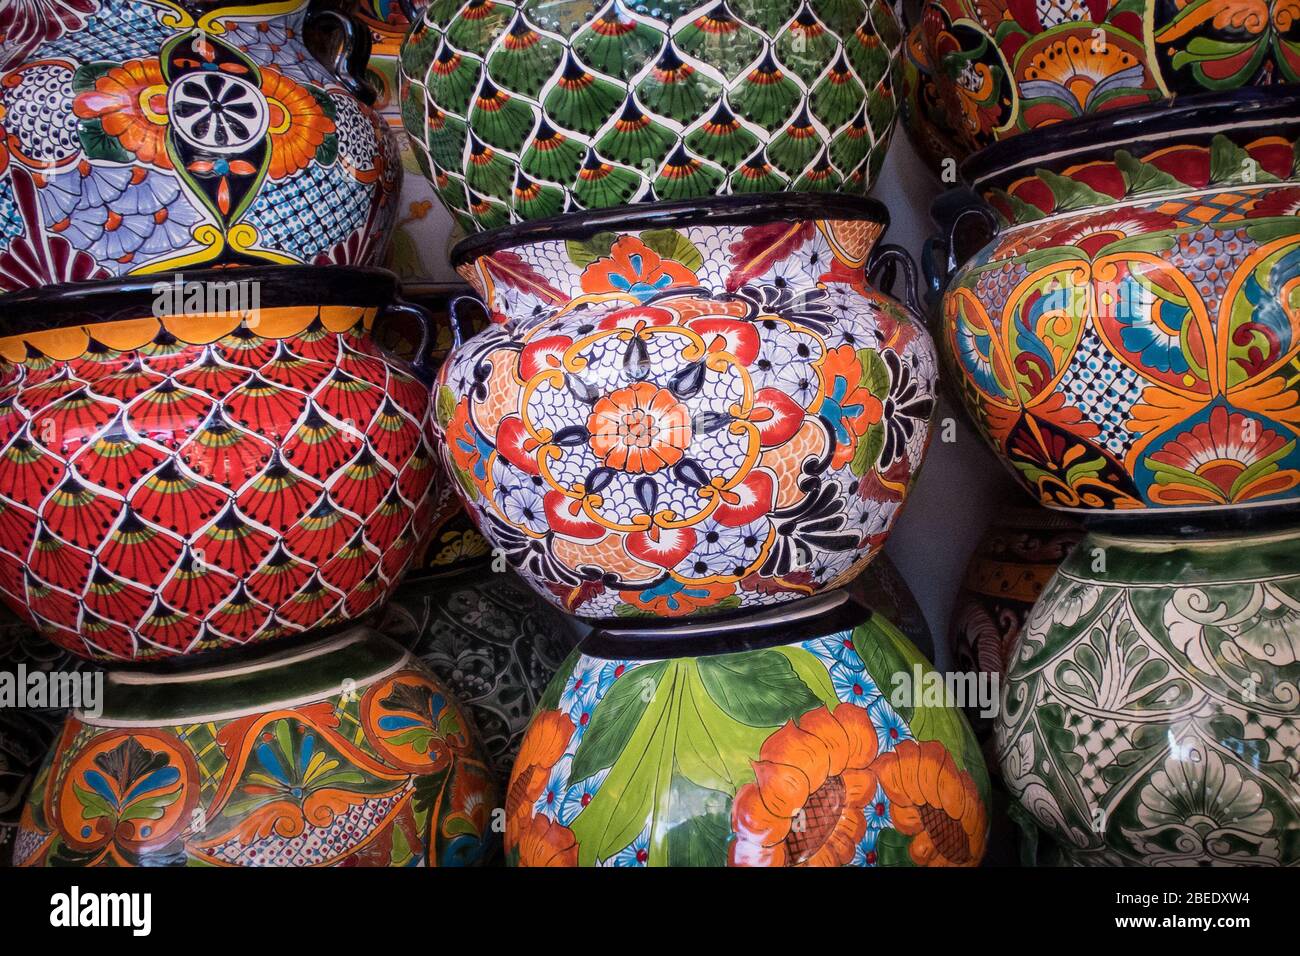 A stack of colorful Talavera pots sits in a Mexican market ready for sale in Puerto Peñasco, Sonora, Mexico. Stock Photo